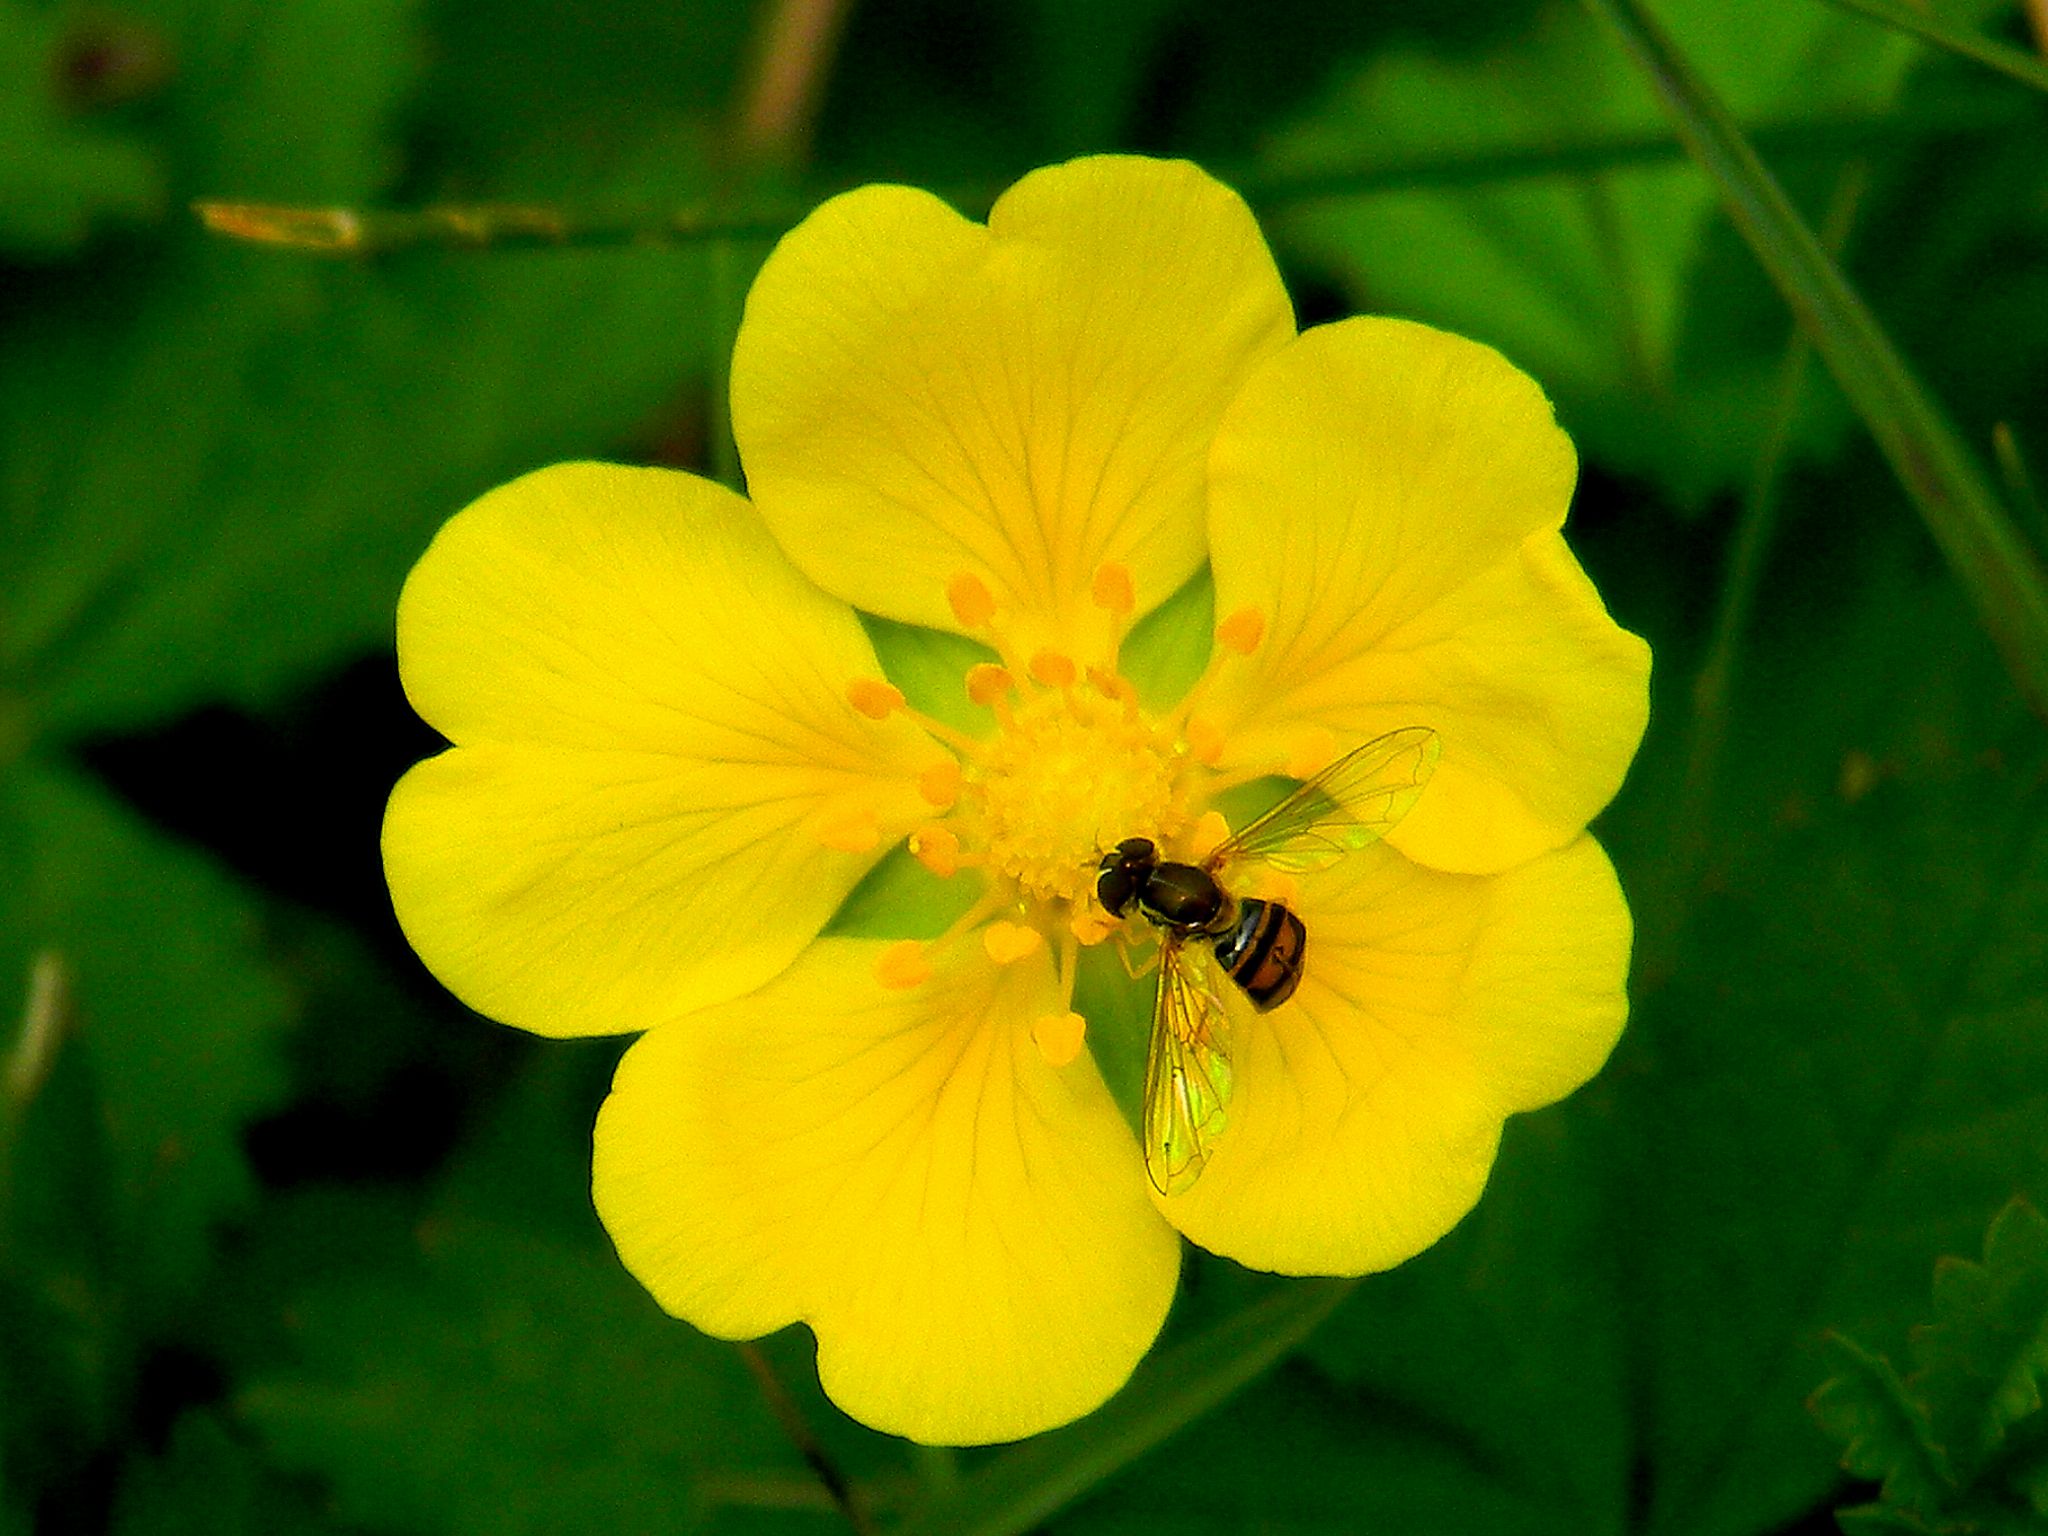 the yellow flower with a bee is blooming